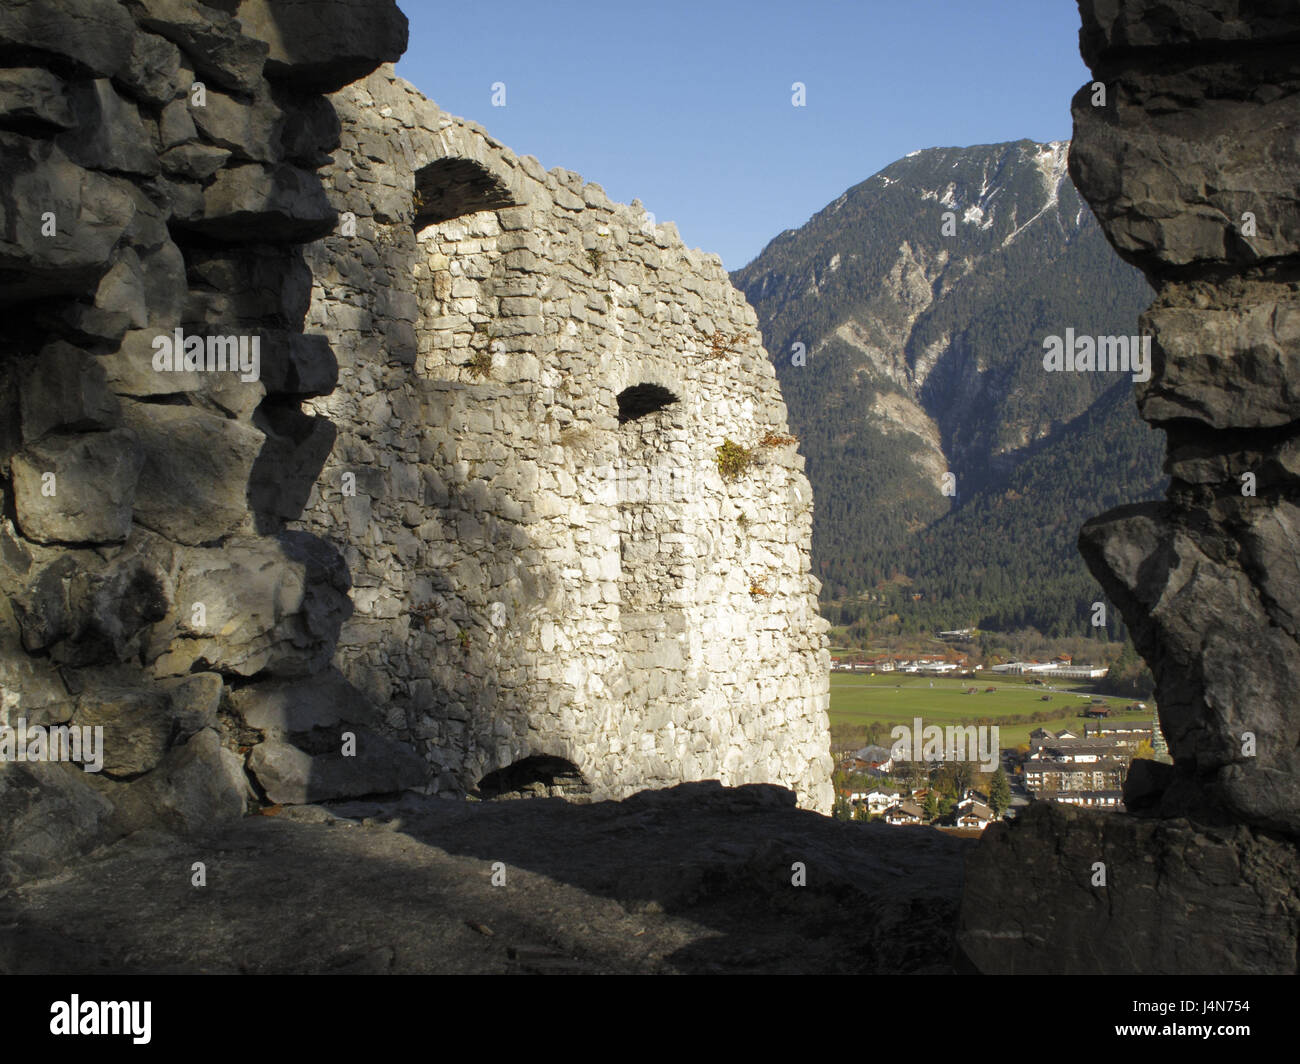 Ruin, castle Werdenfels, Garmisch-Partenkirchen, Werdenfelser Land, Upper Bavaria, Bavaria, Germany, Europe, remains, architecture, outside, outside, outside, outside, outsides, bastion, bastions, structure, structures, in Bavarian, Bavarian, Bavarian, Bavarian, Bavaria, in Bavarian, Bavarian, Bavarian, Bavarian, fortification, fortifications, the FRG, the federal republic, castle, castles, castle ruin, castle ruins, in German, German, more in German, German, Germany, outdoors, outdoors, European, European, European, European, Europe, European, European, European, European, fortress, Stock Photo